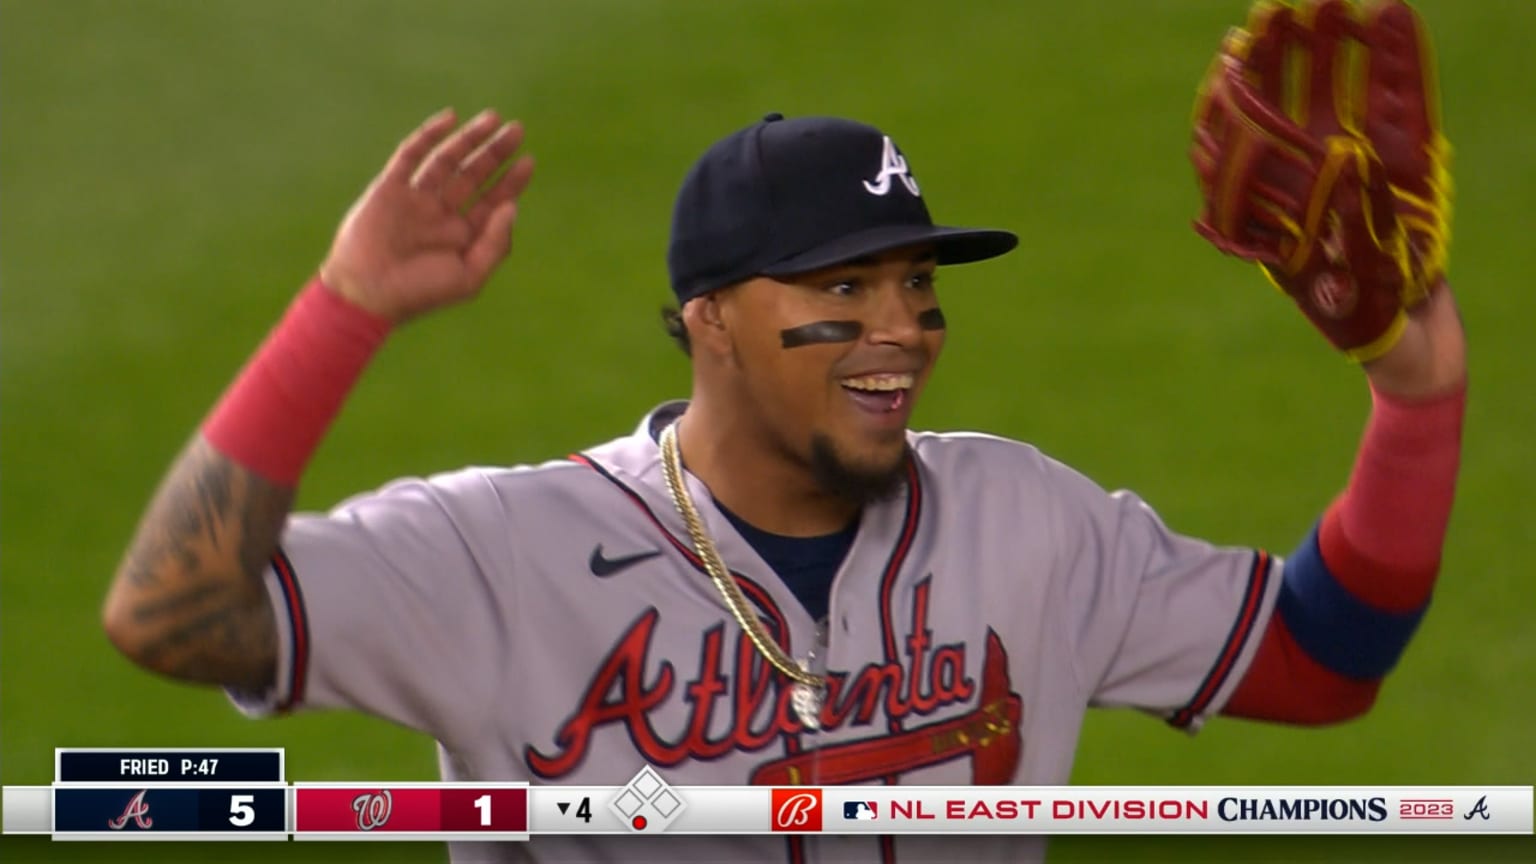 Arcia's tiebreaking single in 9th lifts Braves past Giants